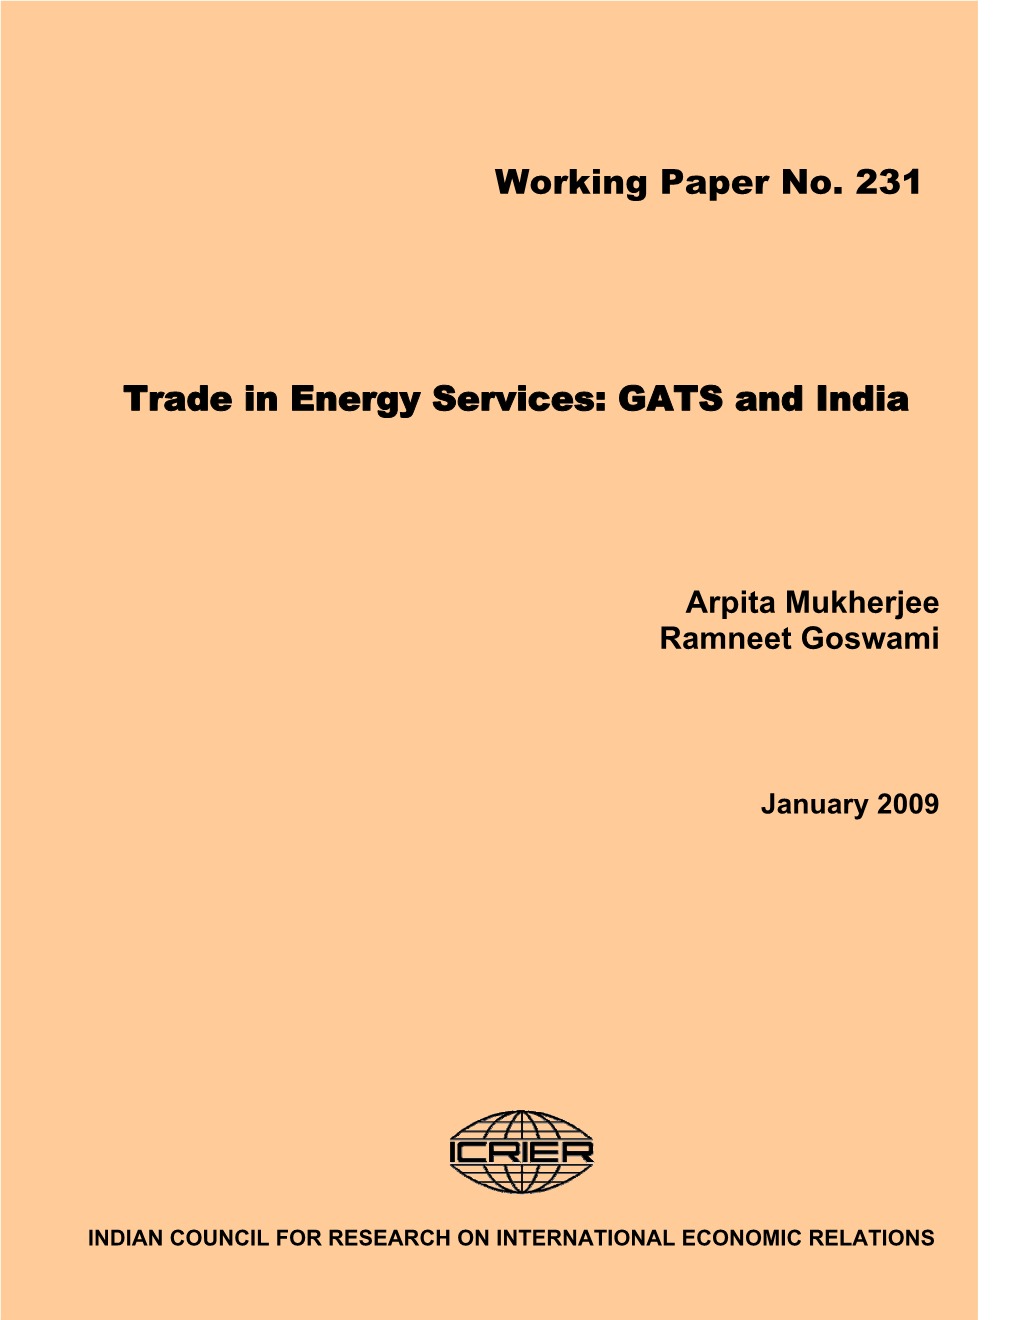 Trade in Energy Services: GATS and India